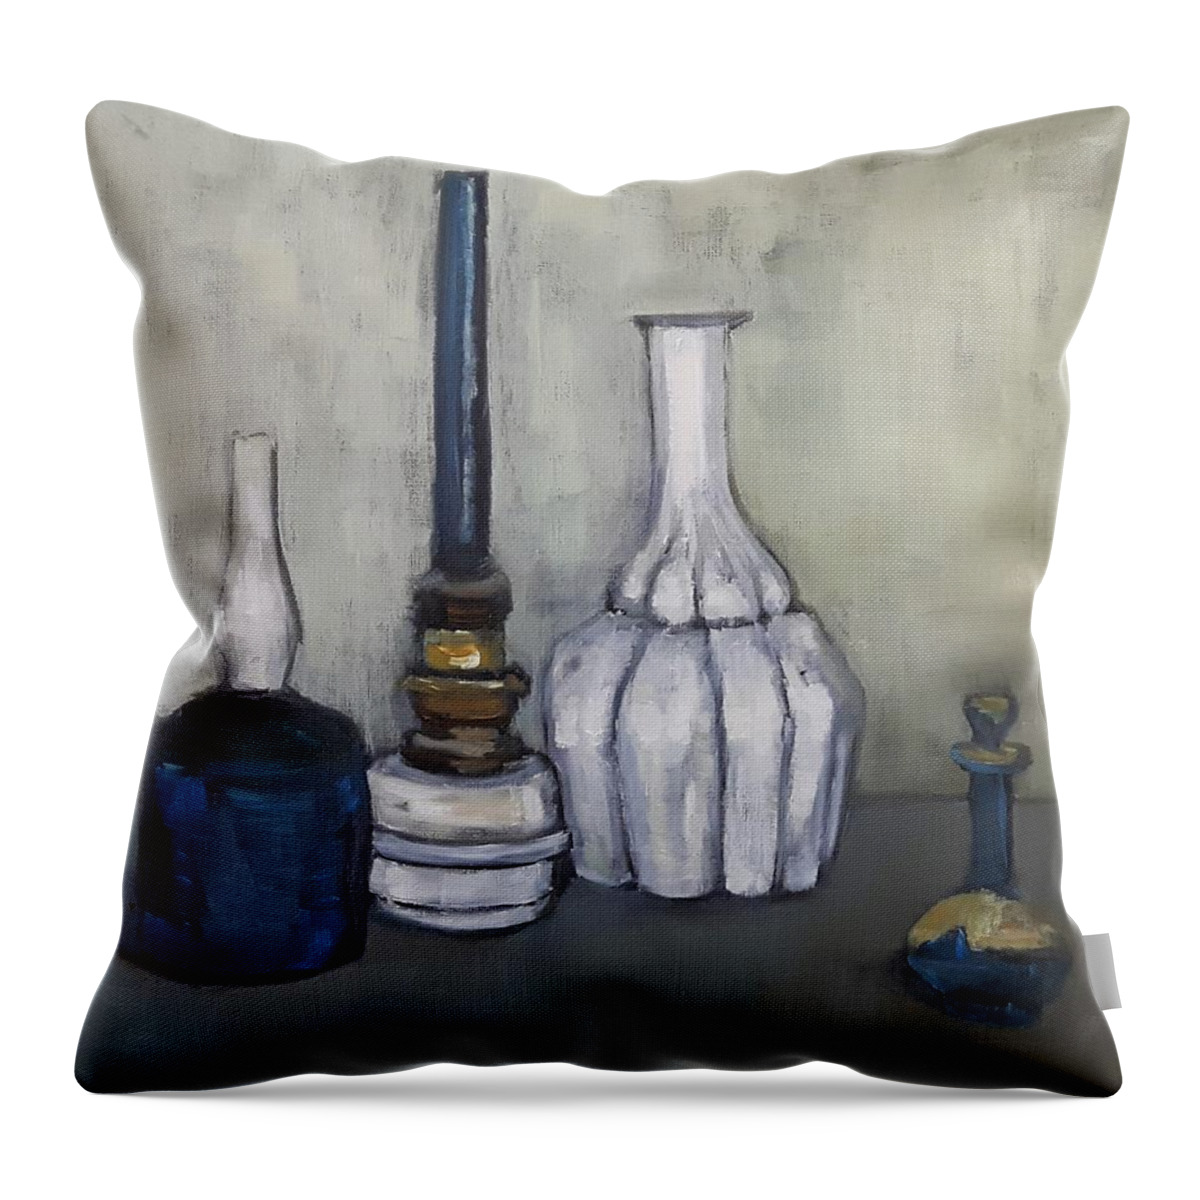 Still Throw Pillow featuring the painting Still after G. Morandi by Christel Roelandt